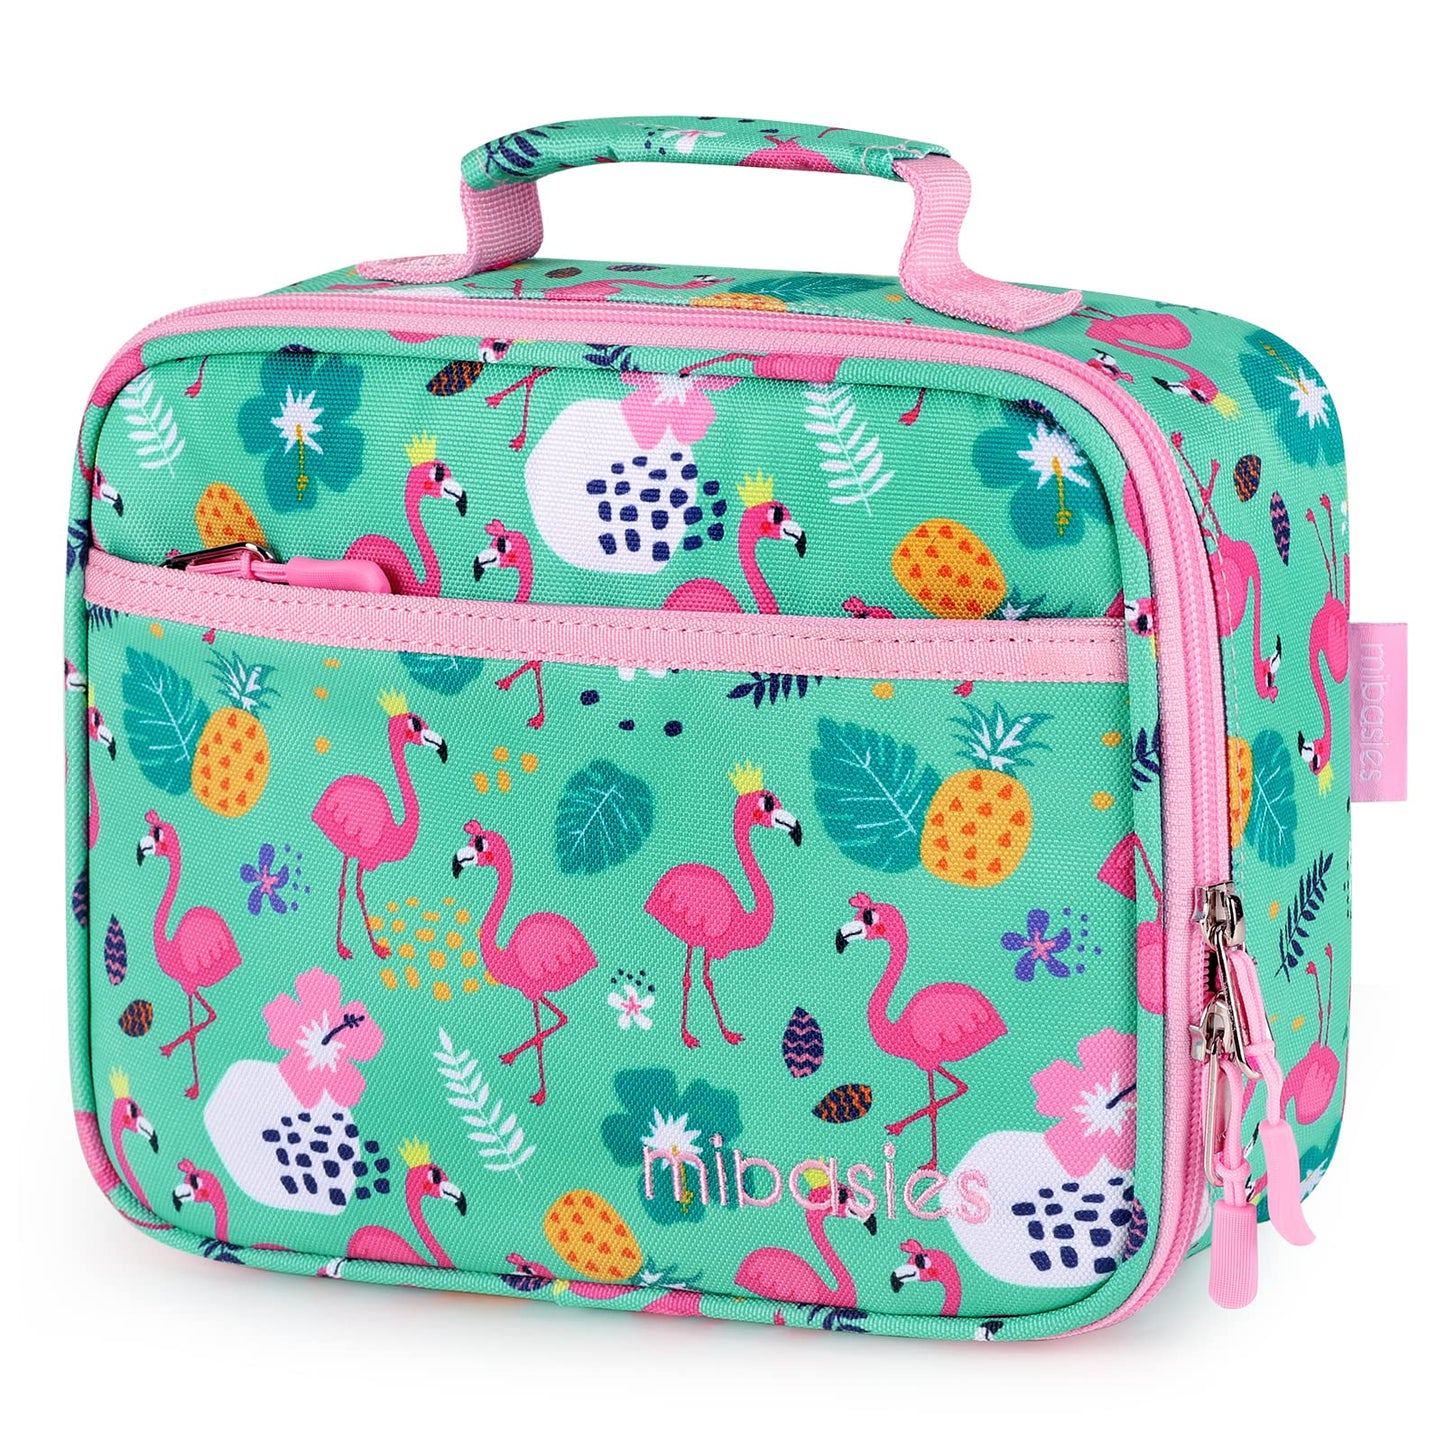 FUN FOR SPRING Lunch Bag